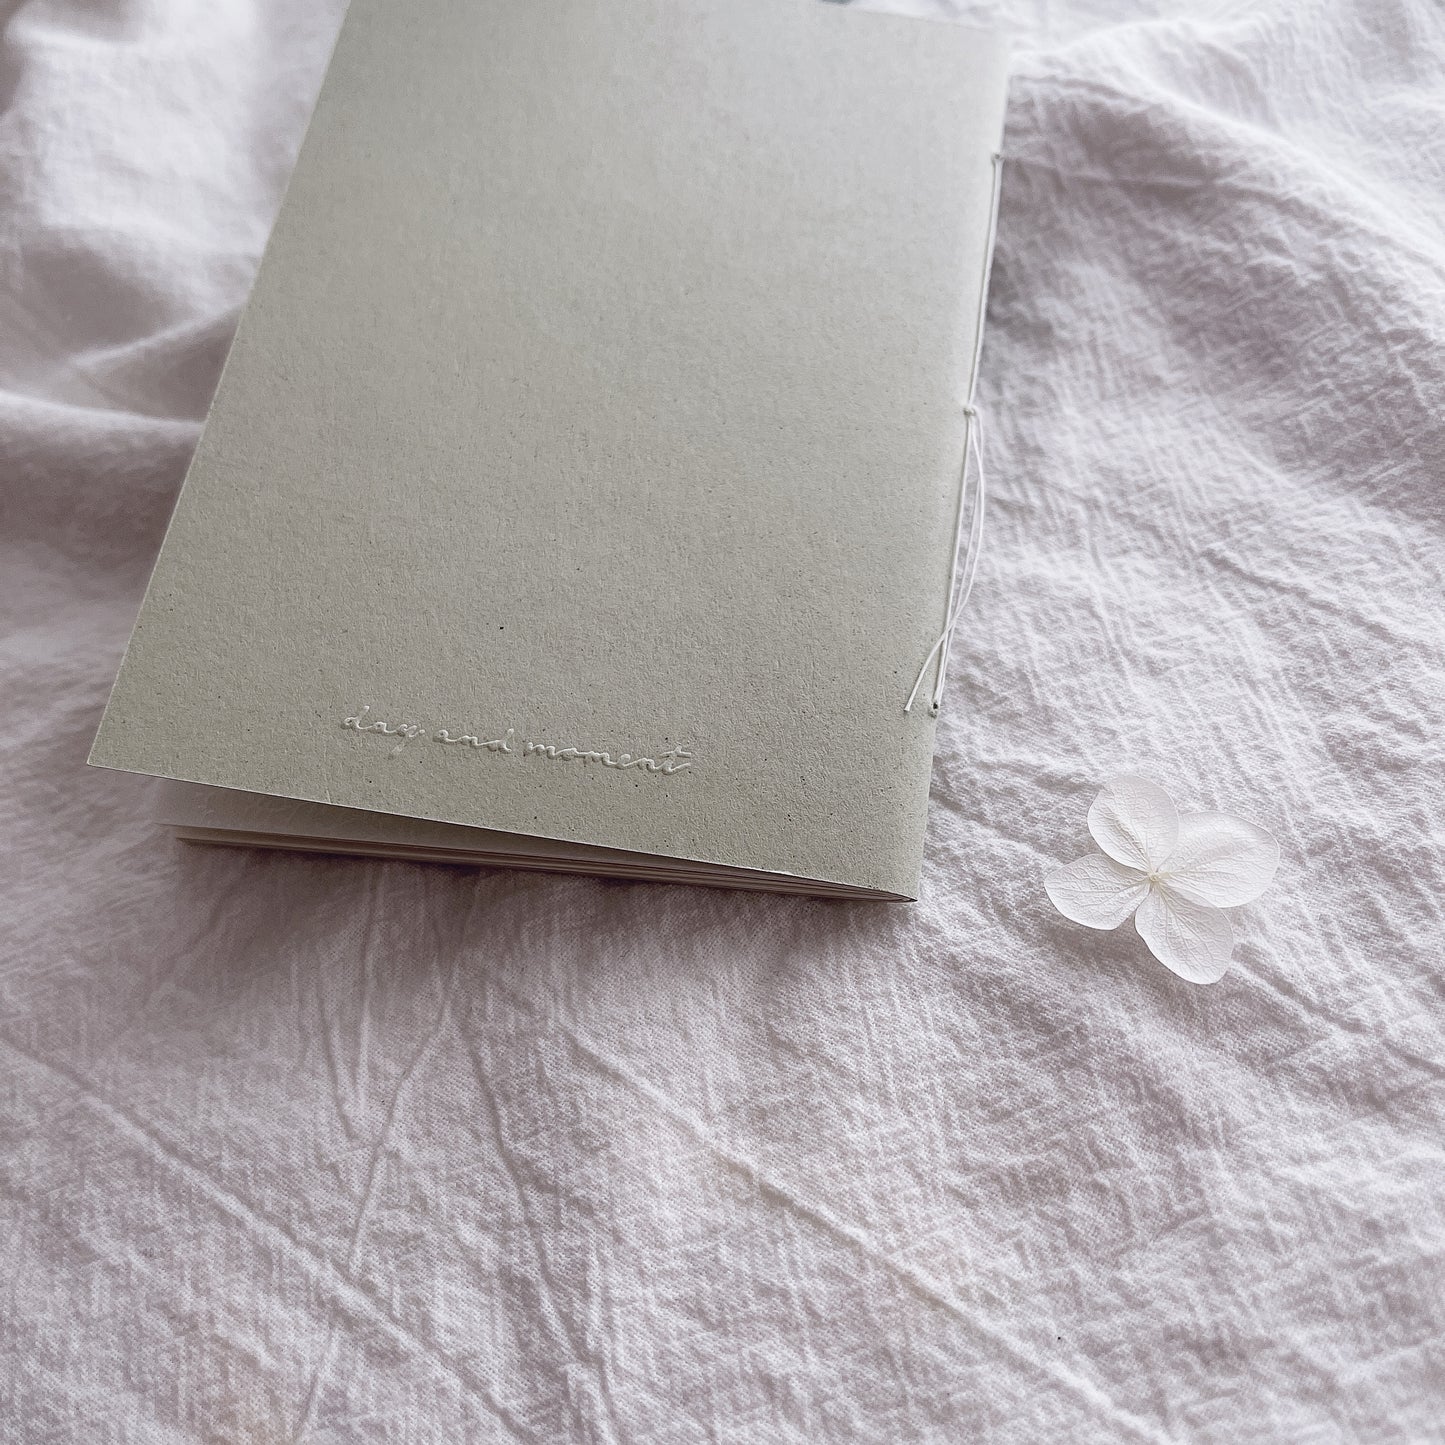 Day and Moment Lily of the Valley Handmade Notebook// Passport Size